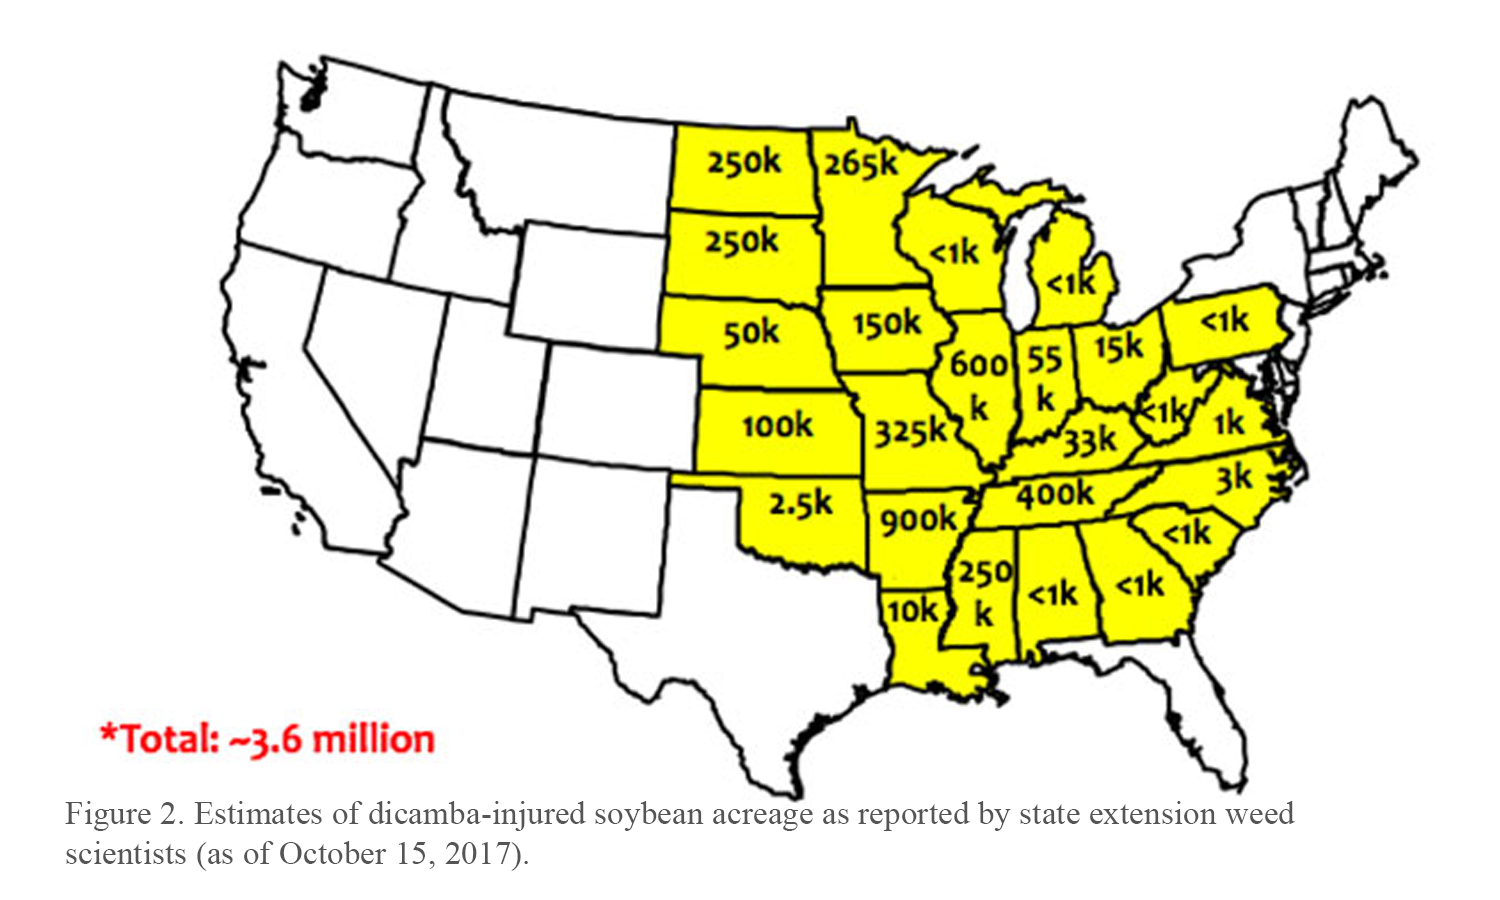 Figure 2: Estimates of dicamba-injured soybean acreage as reported by state extension weed scientists (as of October 15, 2017). Total of roughly 3.6 million acres. “k” stands for “thousands”